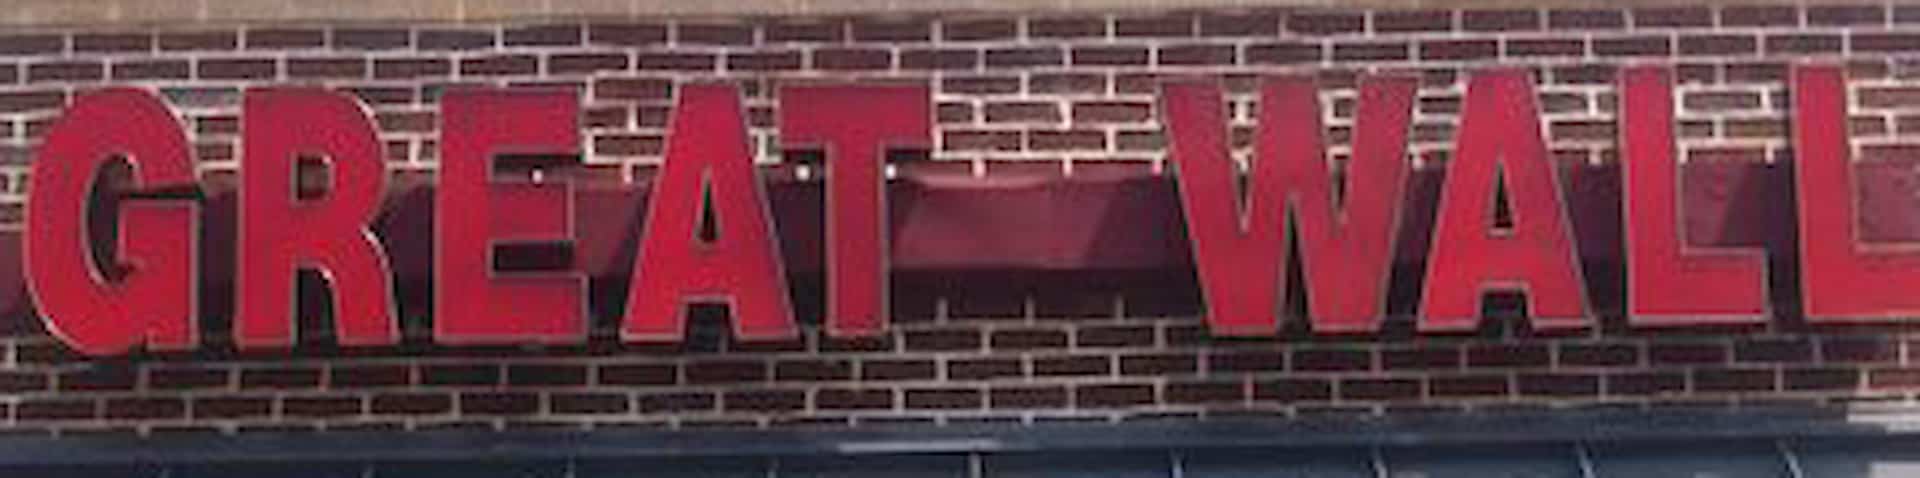 close-up of sign on exterior of restaurant